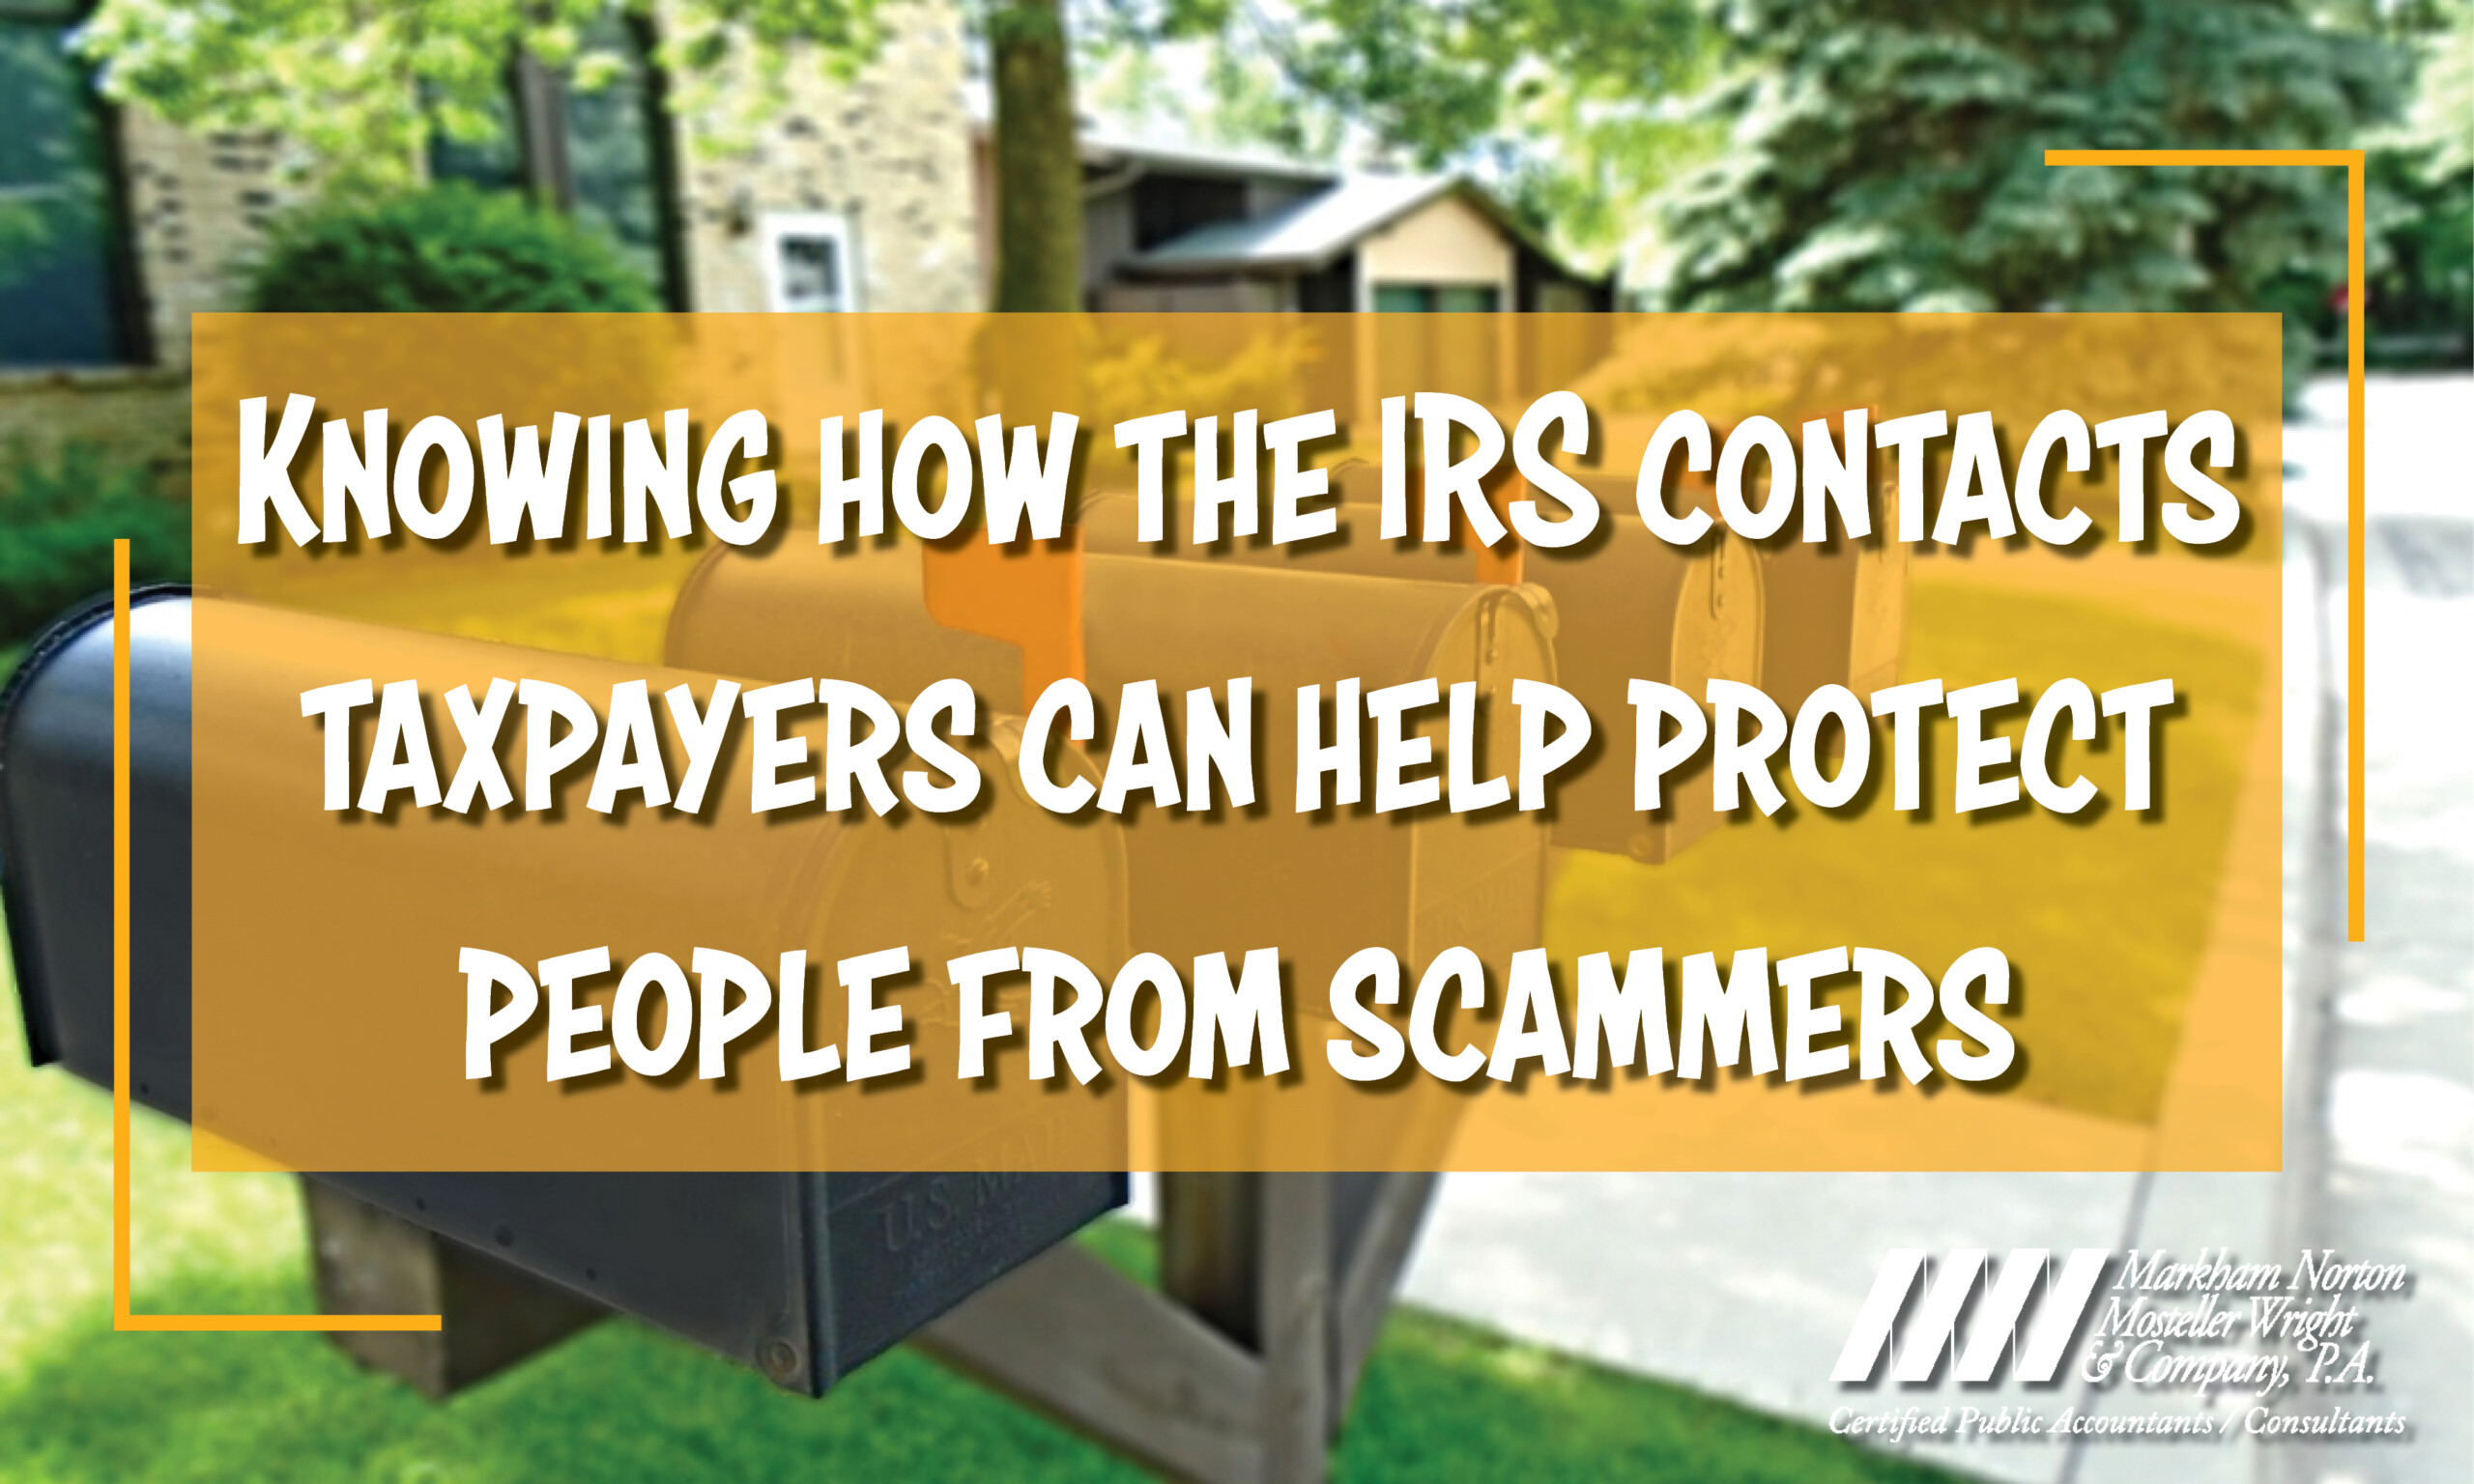 IRS Contacts Taxpayers